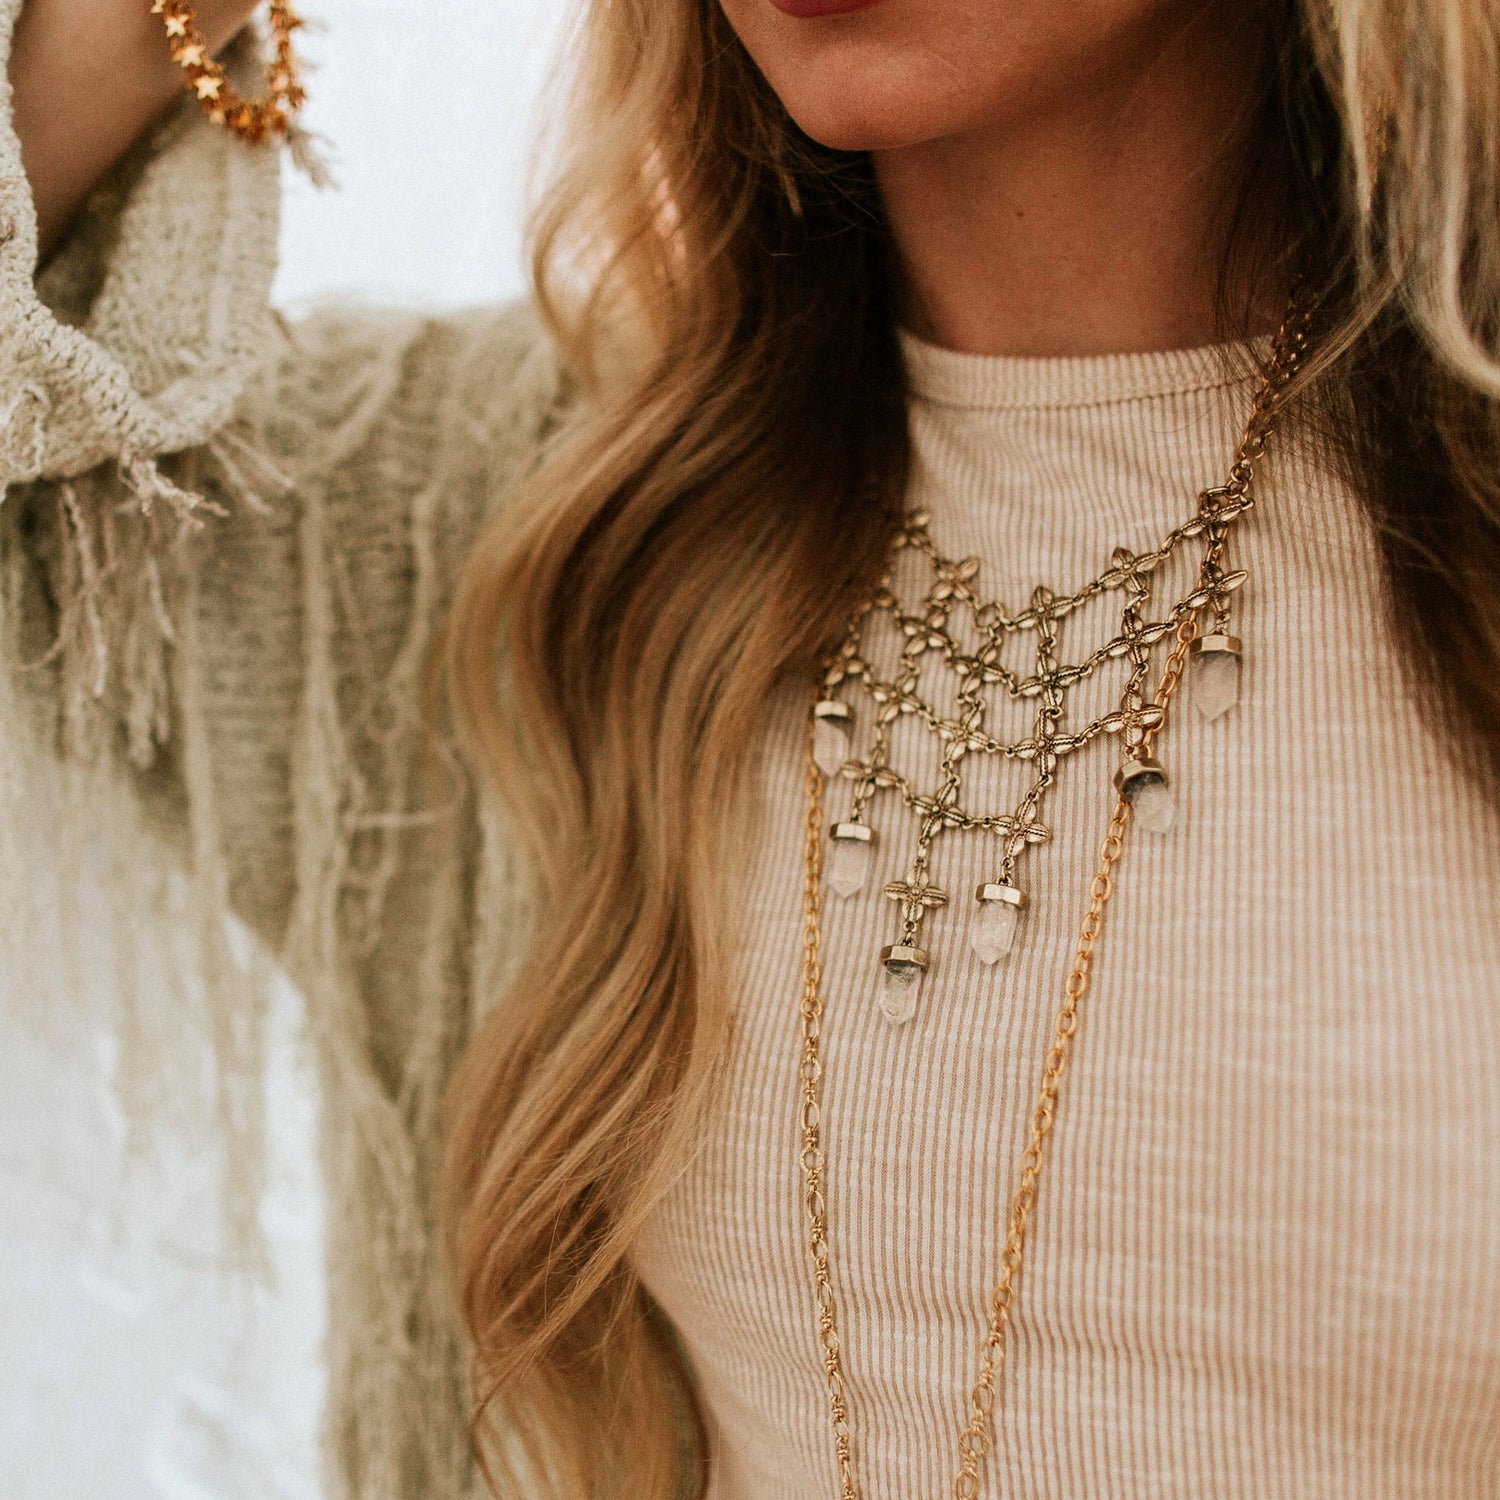 Shine On Crystal Bib Necklace | Gold Plated Antique Finish - Moon Room Shop and Wellness